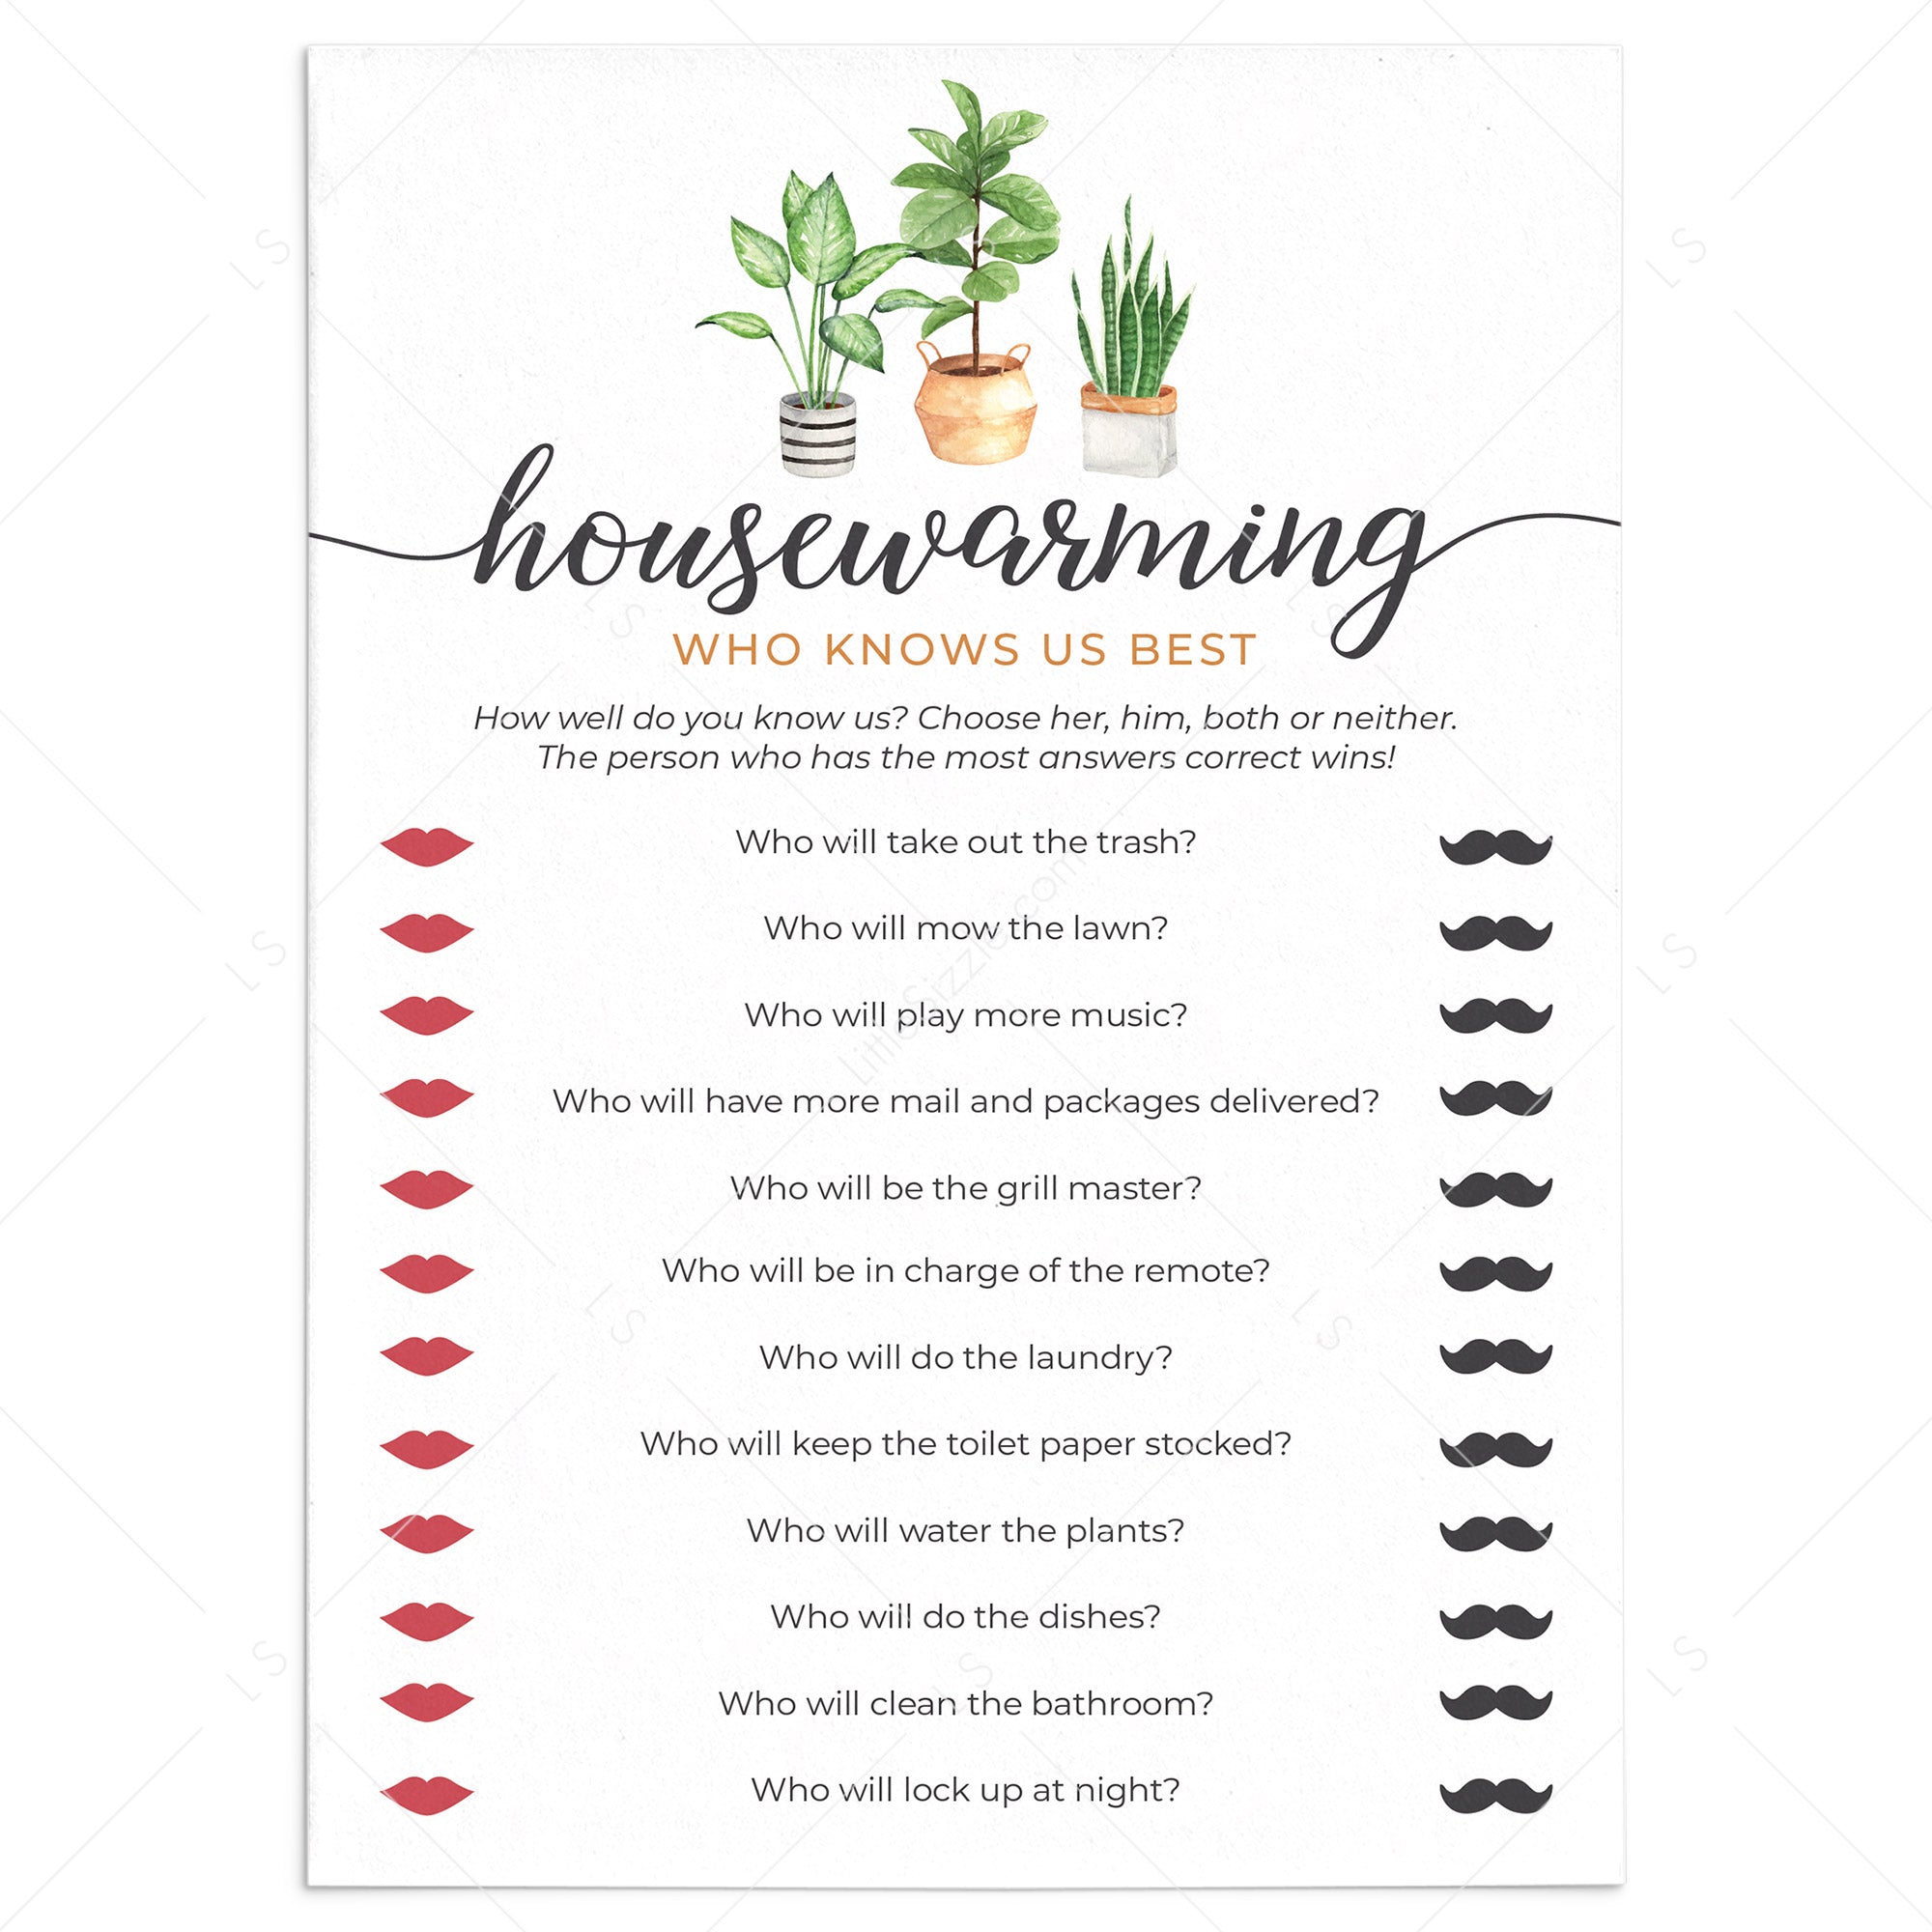 Housewarming Gift Ideas and Free Home Printables - Clean and